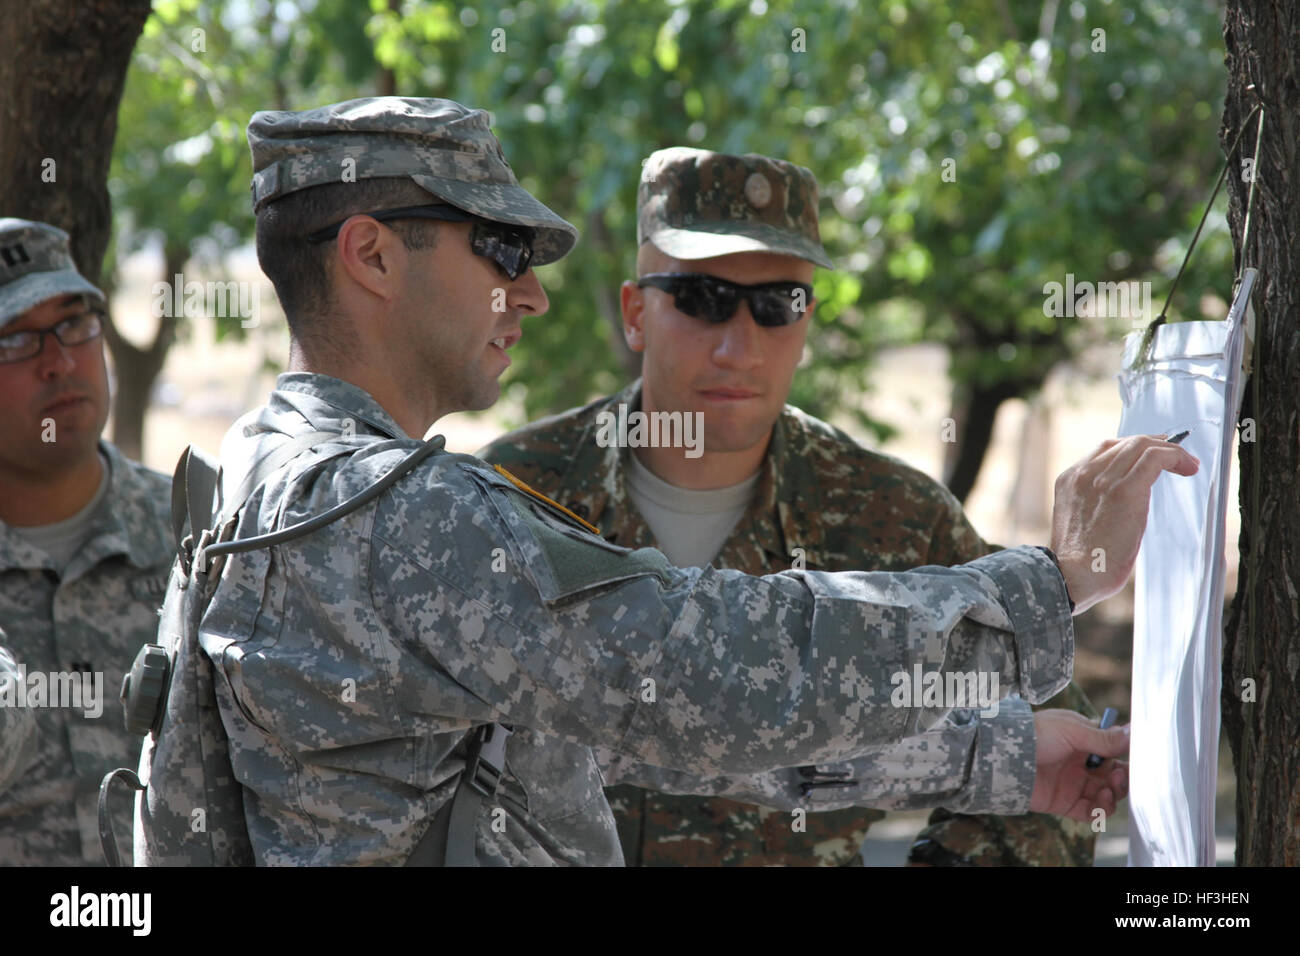 A small group of Kansas National Guardsmen assist and advise Soldiers with the Armenian Peacekeeping Brigade at the Zar Mountain Training Center, near Yerevan, Armenia, July 27 - Aug. 7, 2015, in preparation of a major NATO evaluation in September 2015. The combat readiness evaluation will be the culmination of a years-long process that would certify the interoperability of the Armenian PKB in support of NATO peacekeeping operations. Kansas and Armenia have been partnered in the National Guard Bureau's State Partnership Program since 2003. (U.S. Army National Guard photo by Sgt. Zach Sheely/Re Stock Photo